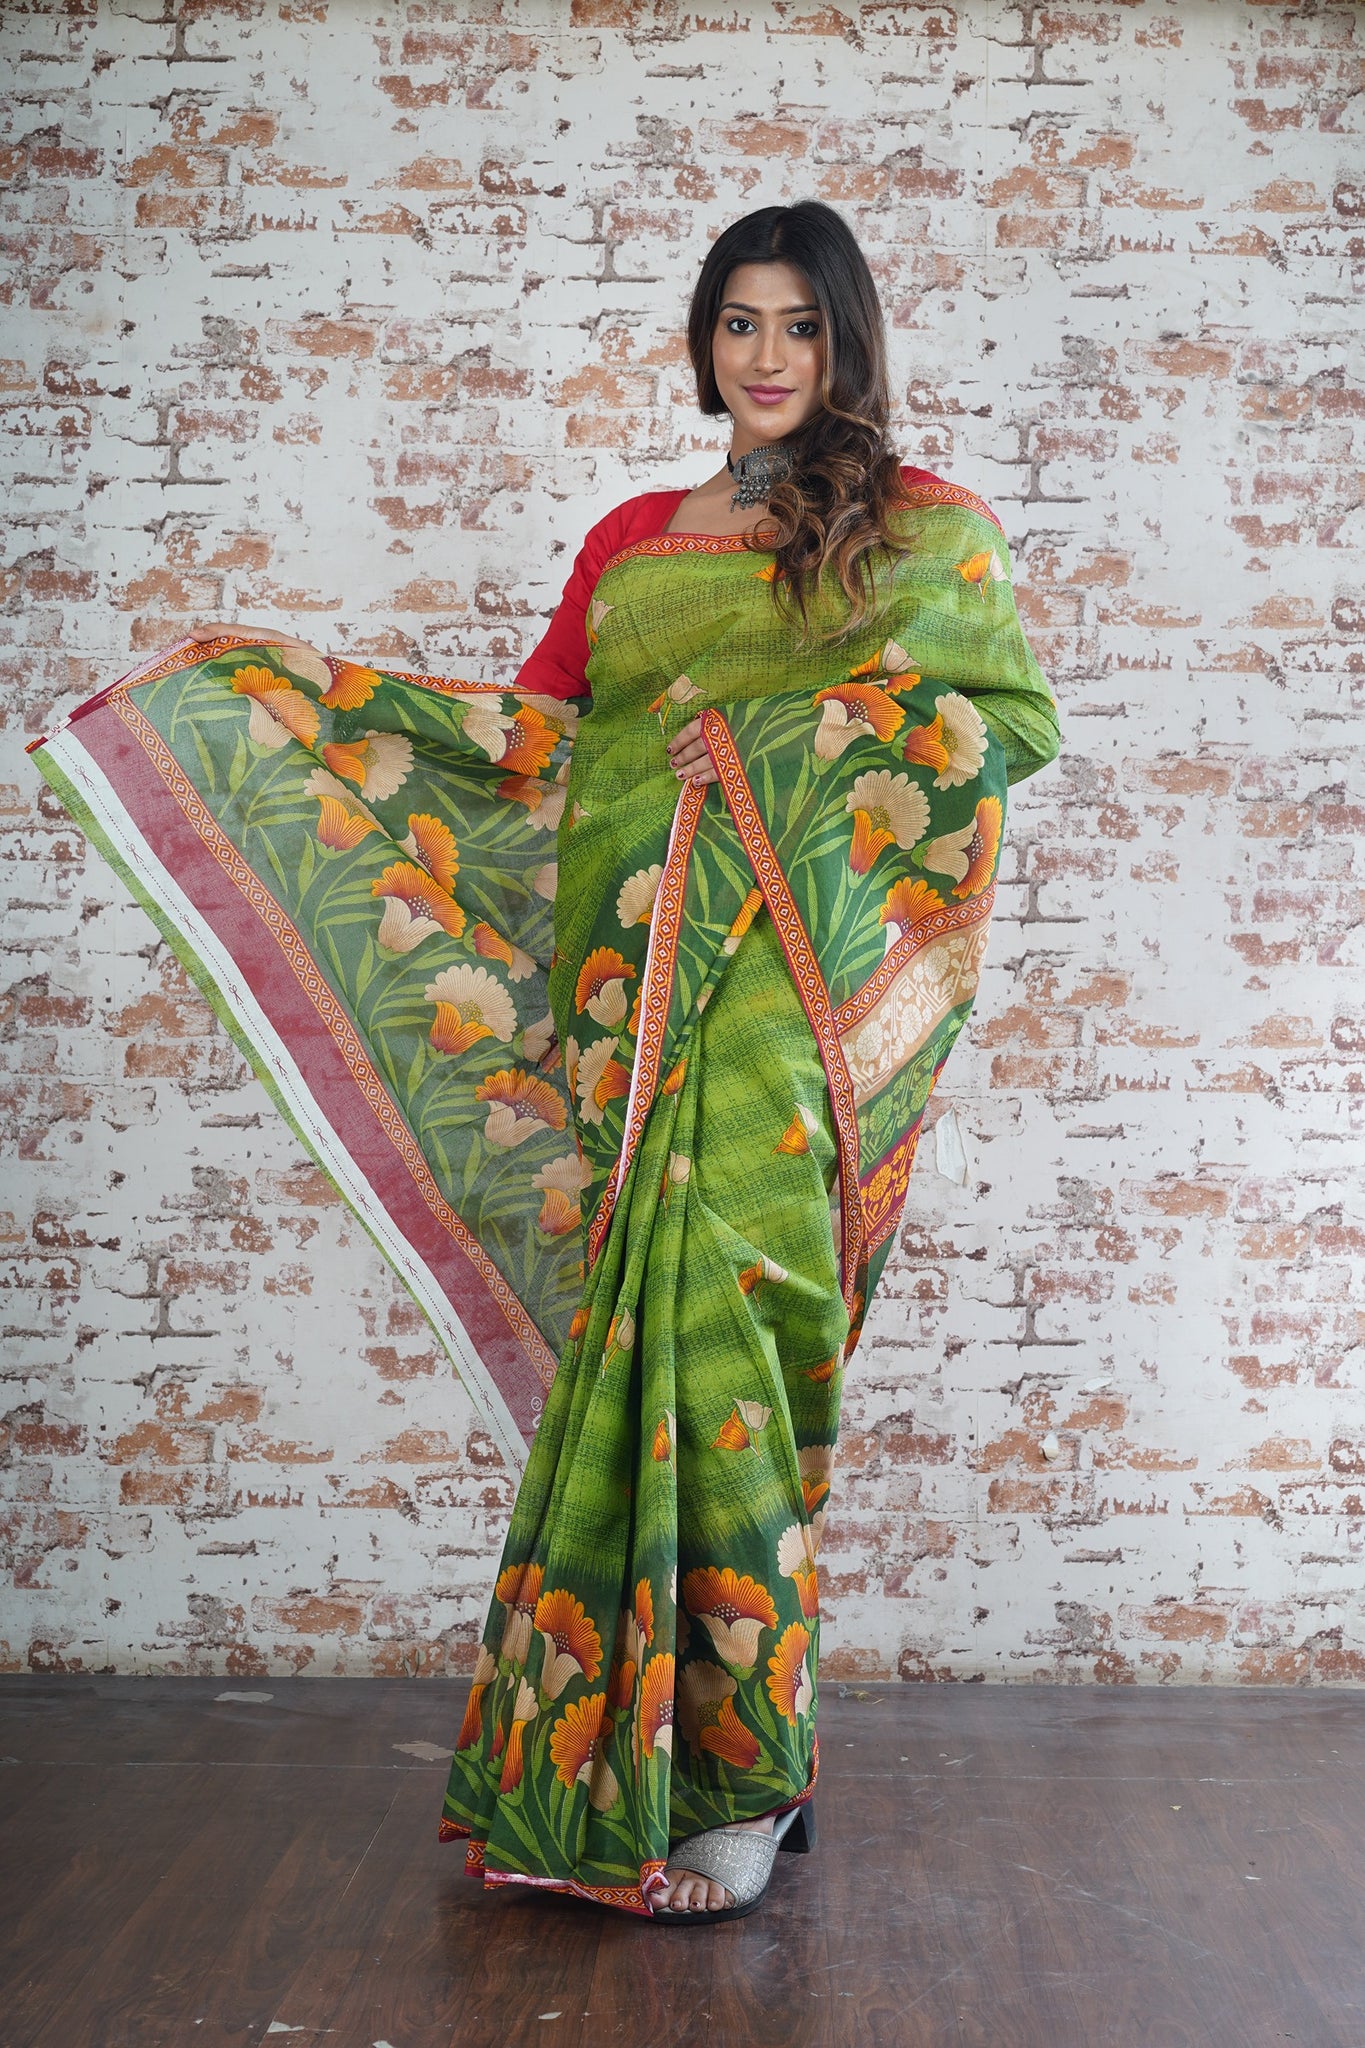 Cotton Printed Saree in Green Color with Stripes and Flower Design with Orange and White Flowers